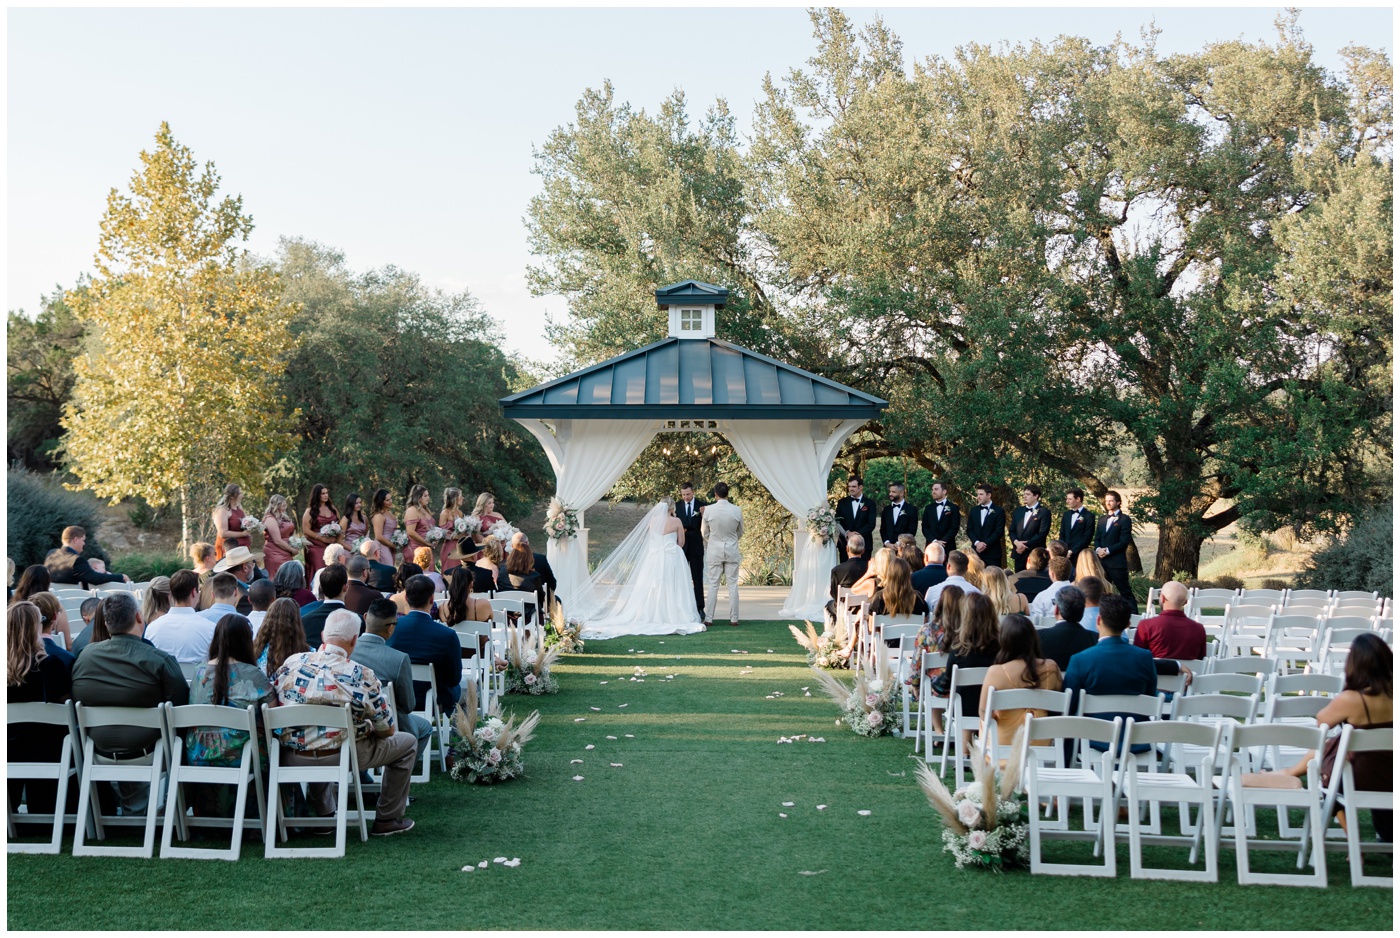 The wedding ceremony at Kendall Point